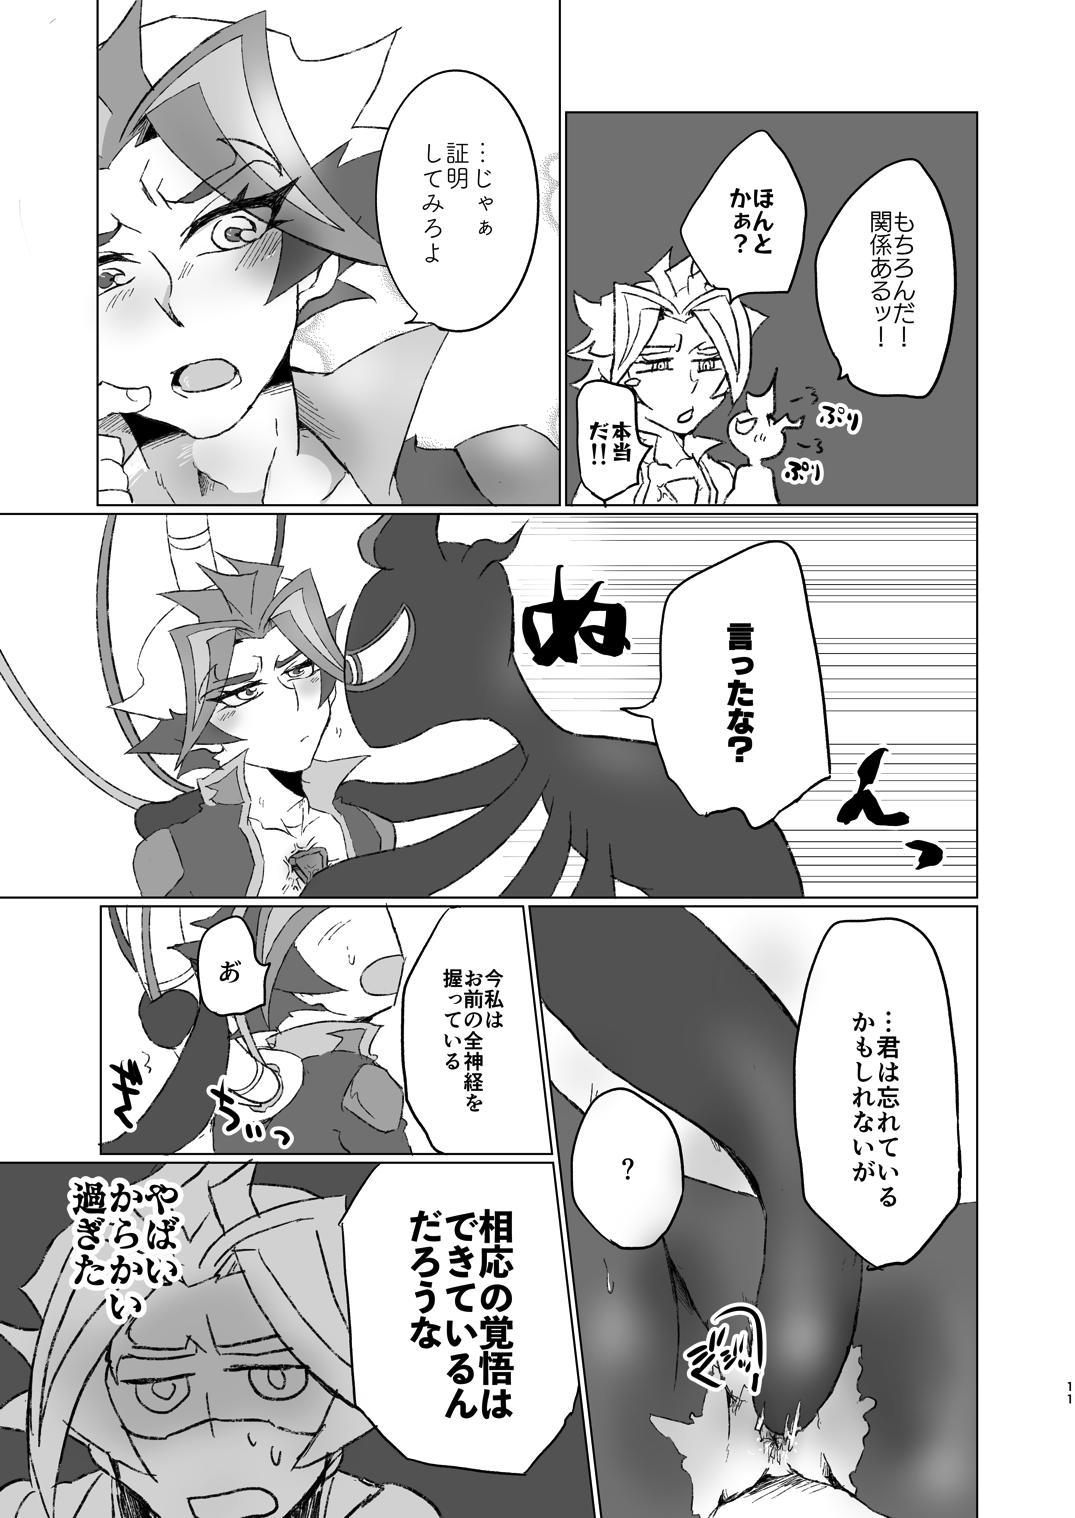 Cash A little bit further - Yu gi oh vrains Black Dick - Page 10